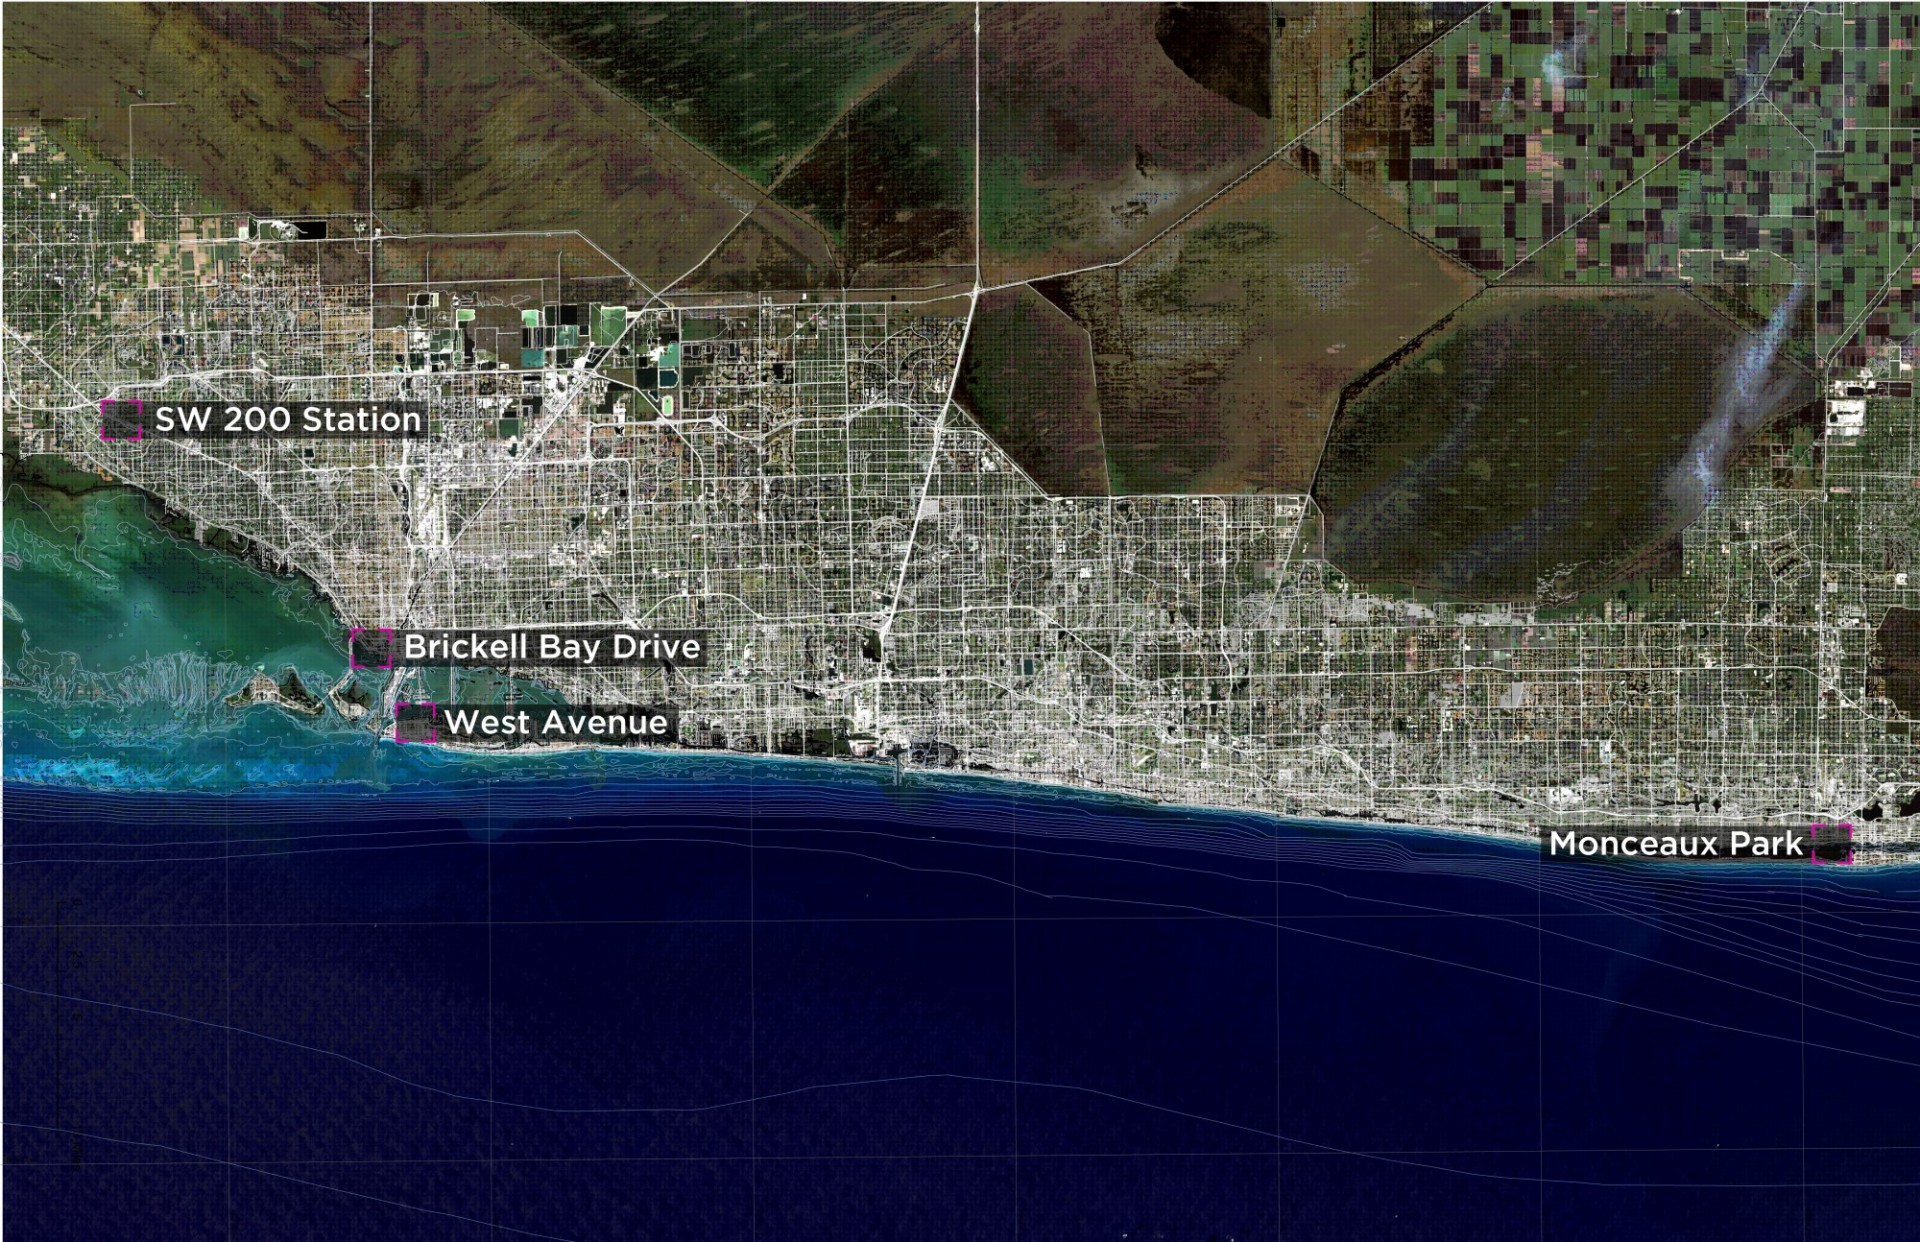 Image of highlighted site locations within an aerial map of the Southeast Florida region.